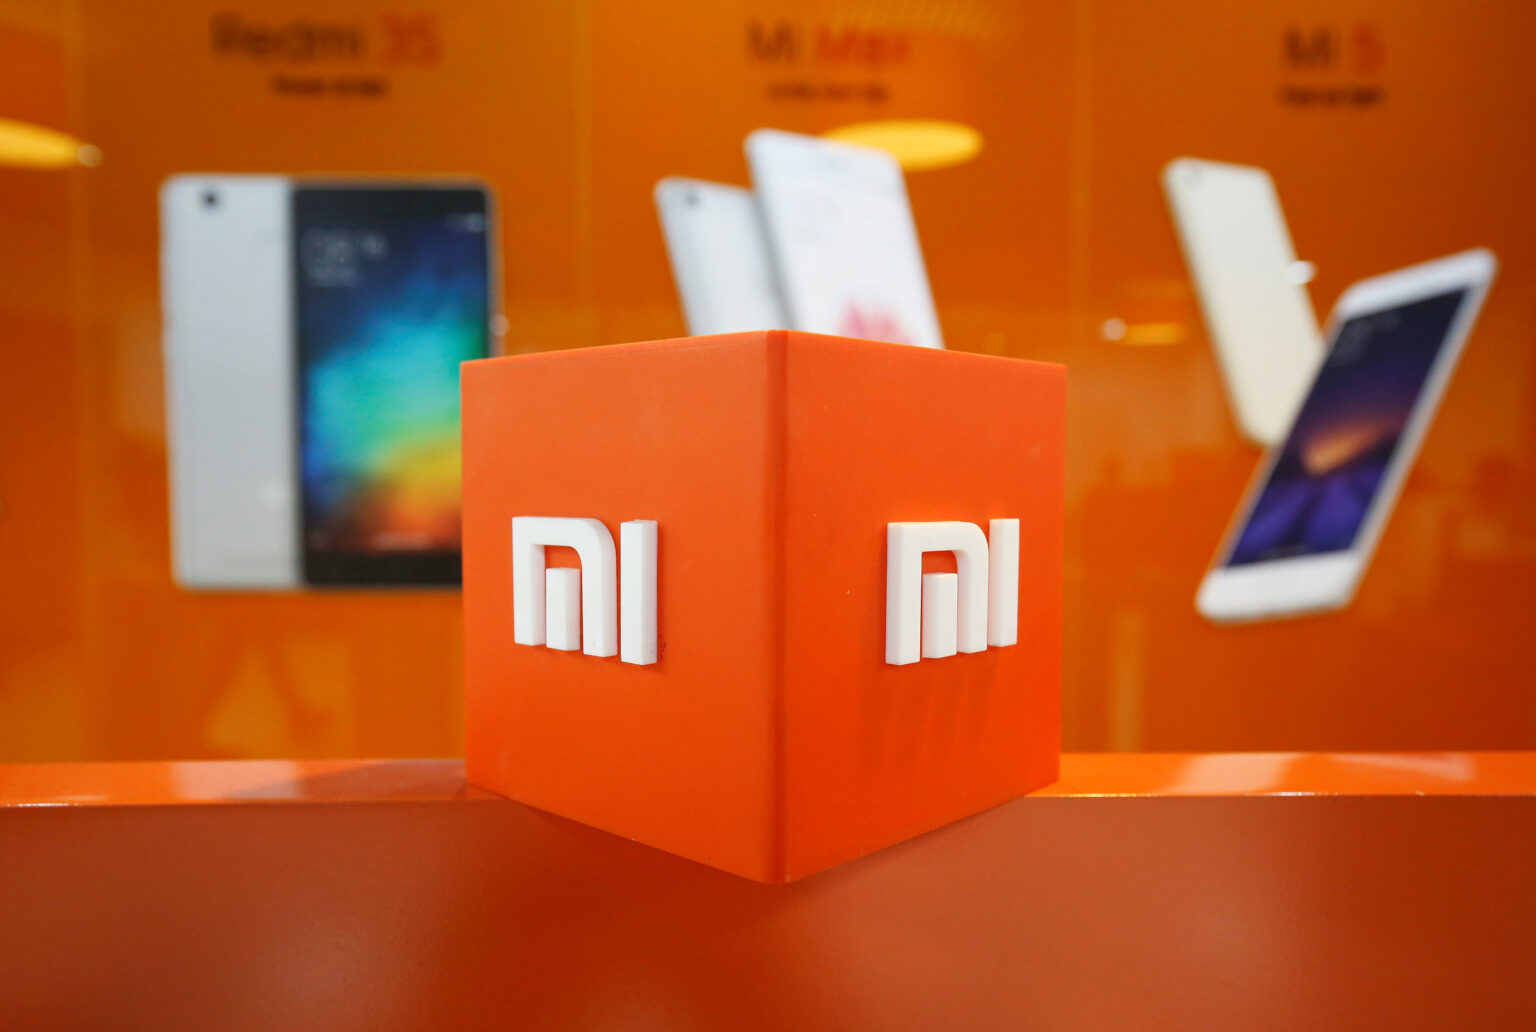 The ED seizes Xiaomi’s assets for forex violations